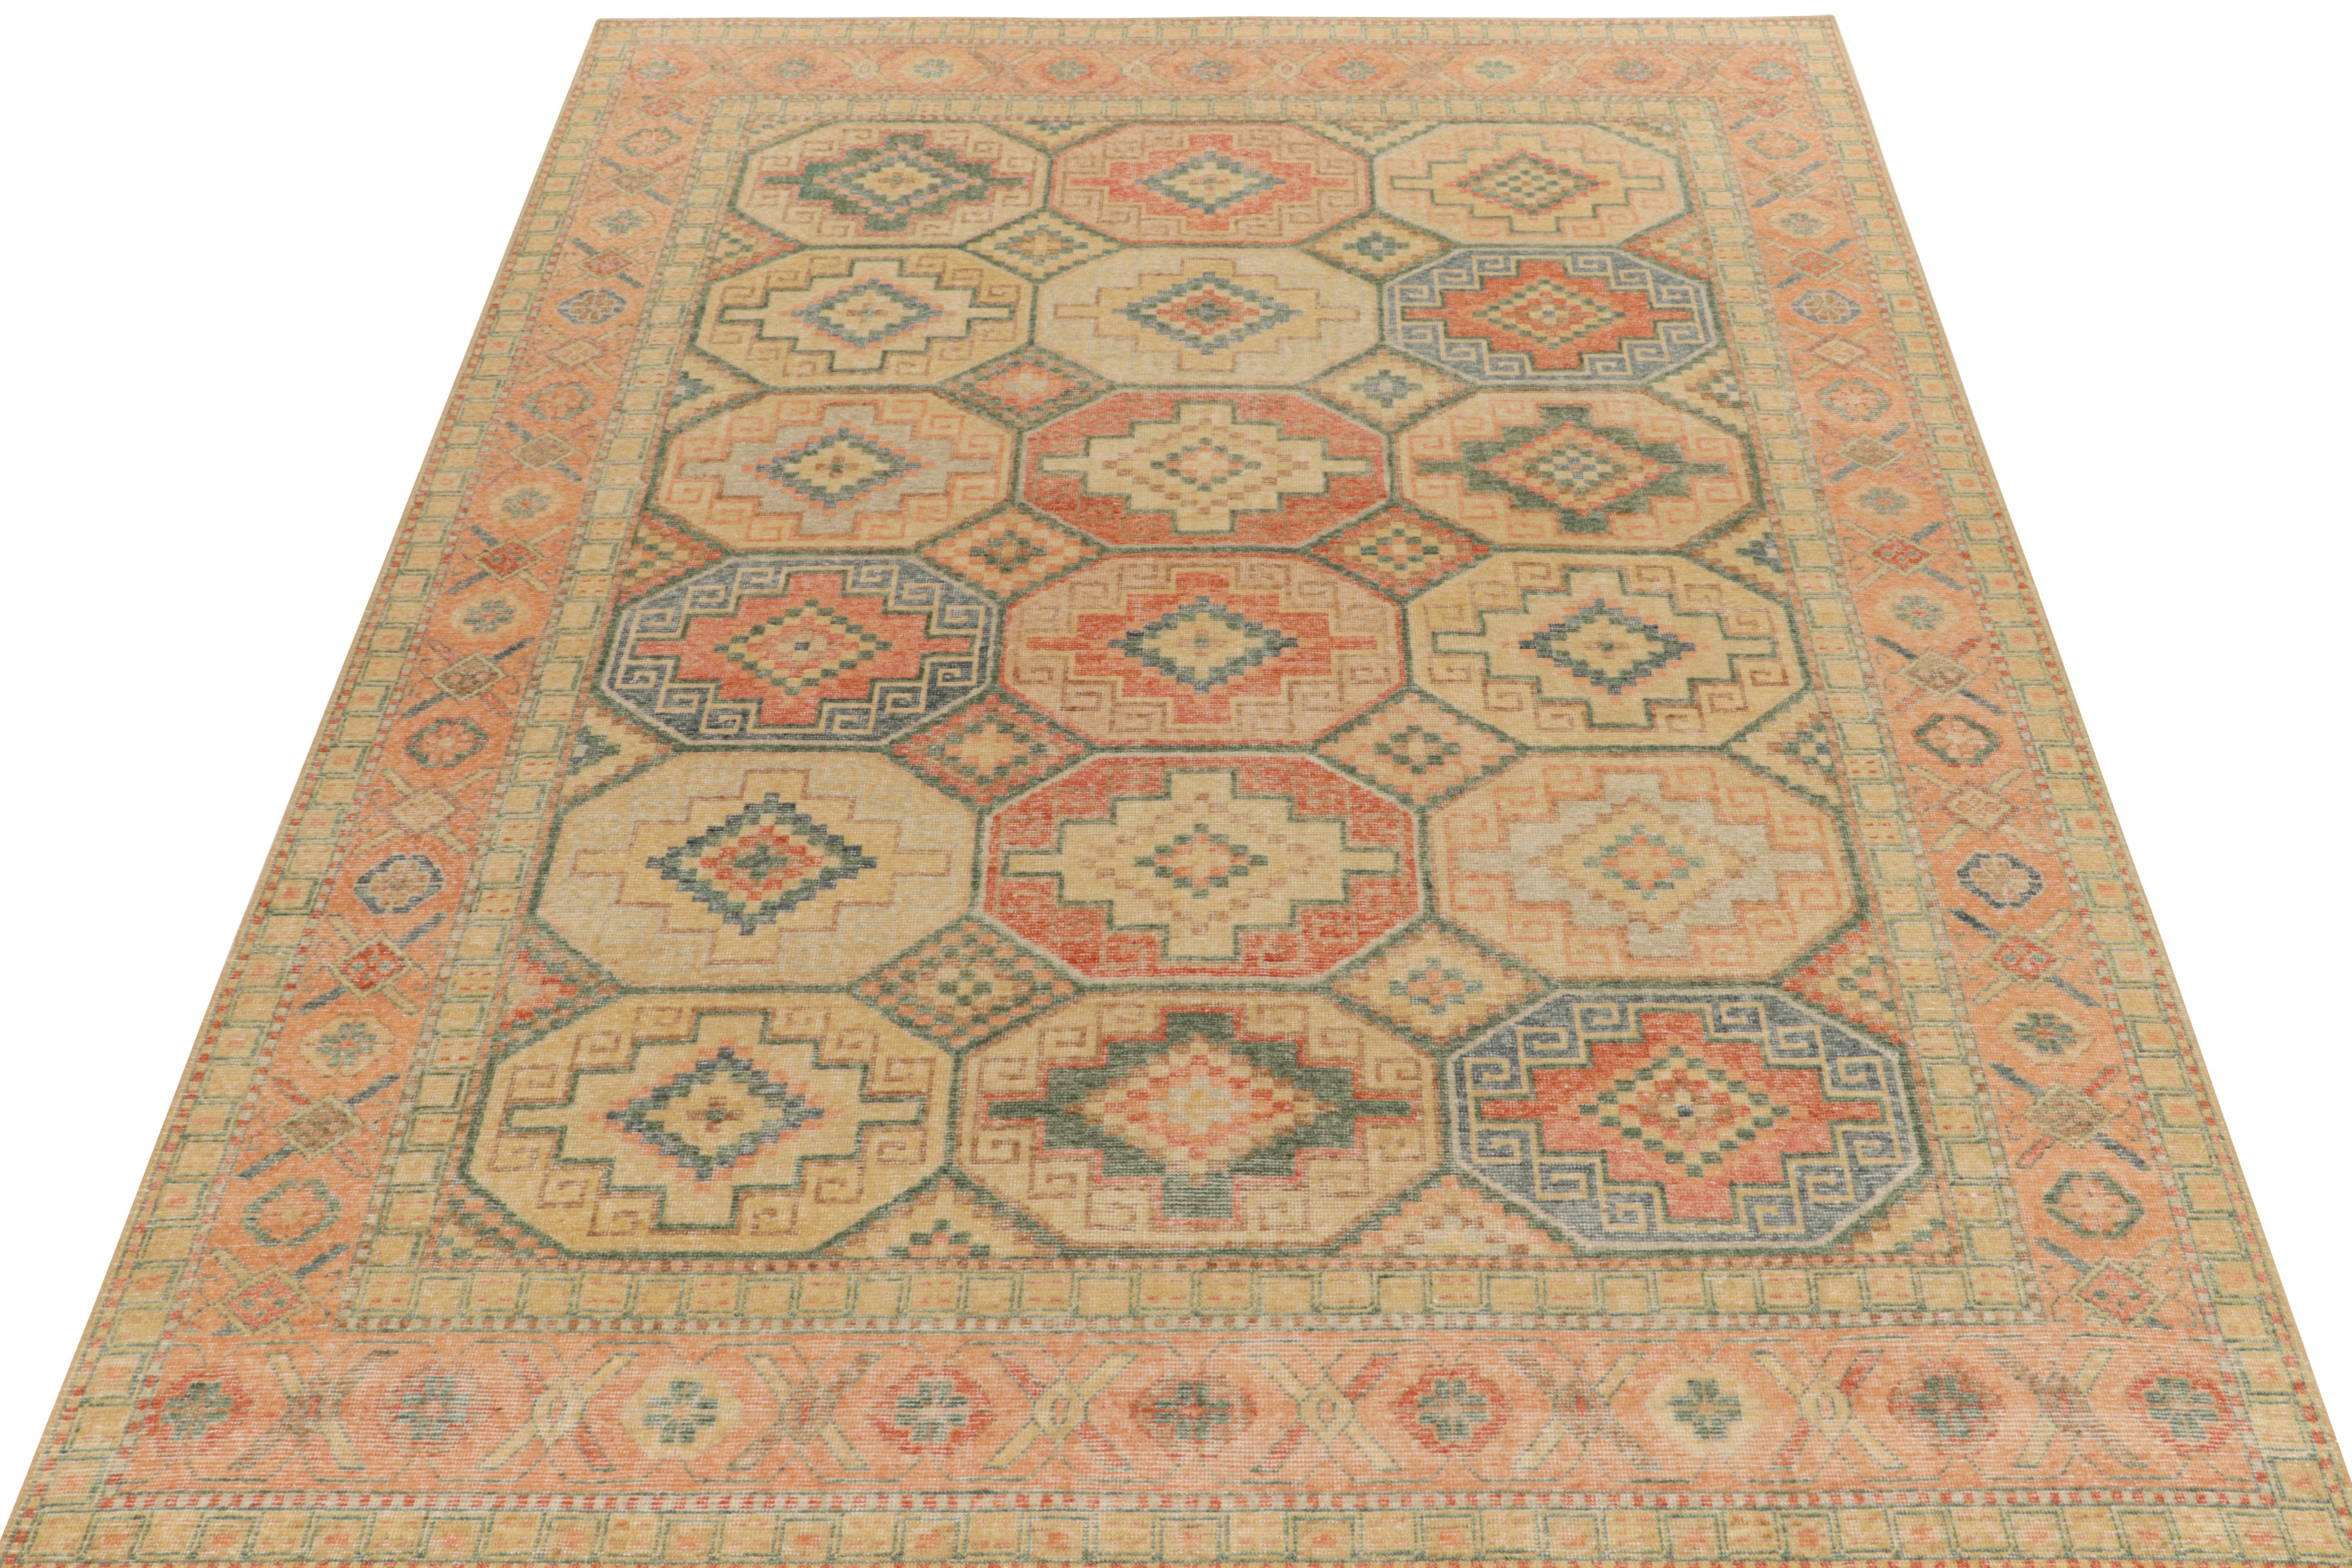 A 9x12 distressed style rug from Rug & Kilim’s Homage collection, thriving on inspiration from a tribal geometric pattern in muted tangerine, blue & beige hues. Connoisseurs may note traditional motifs decorating the borders in similar colorways.